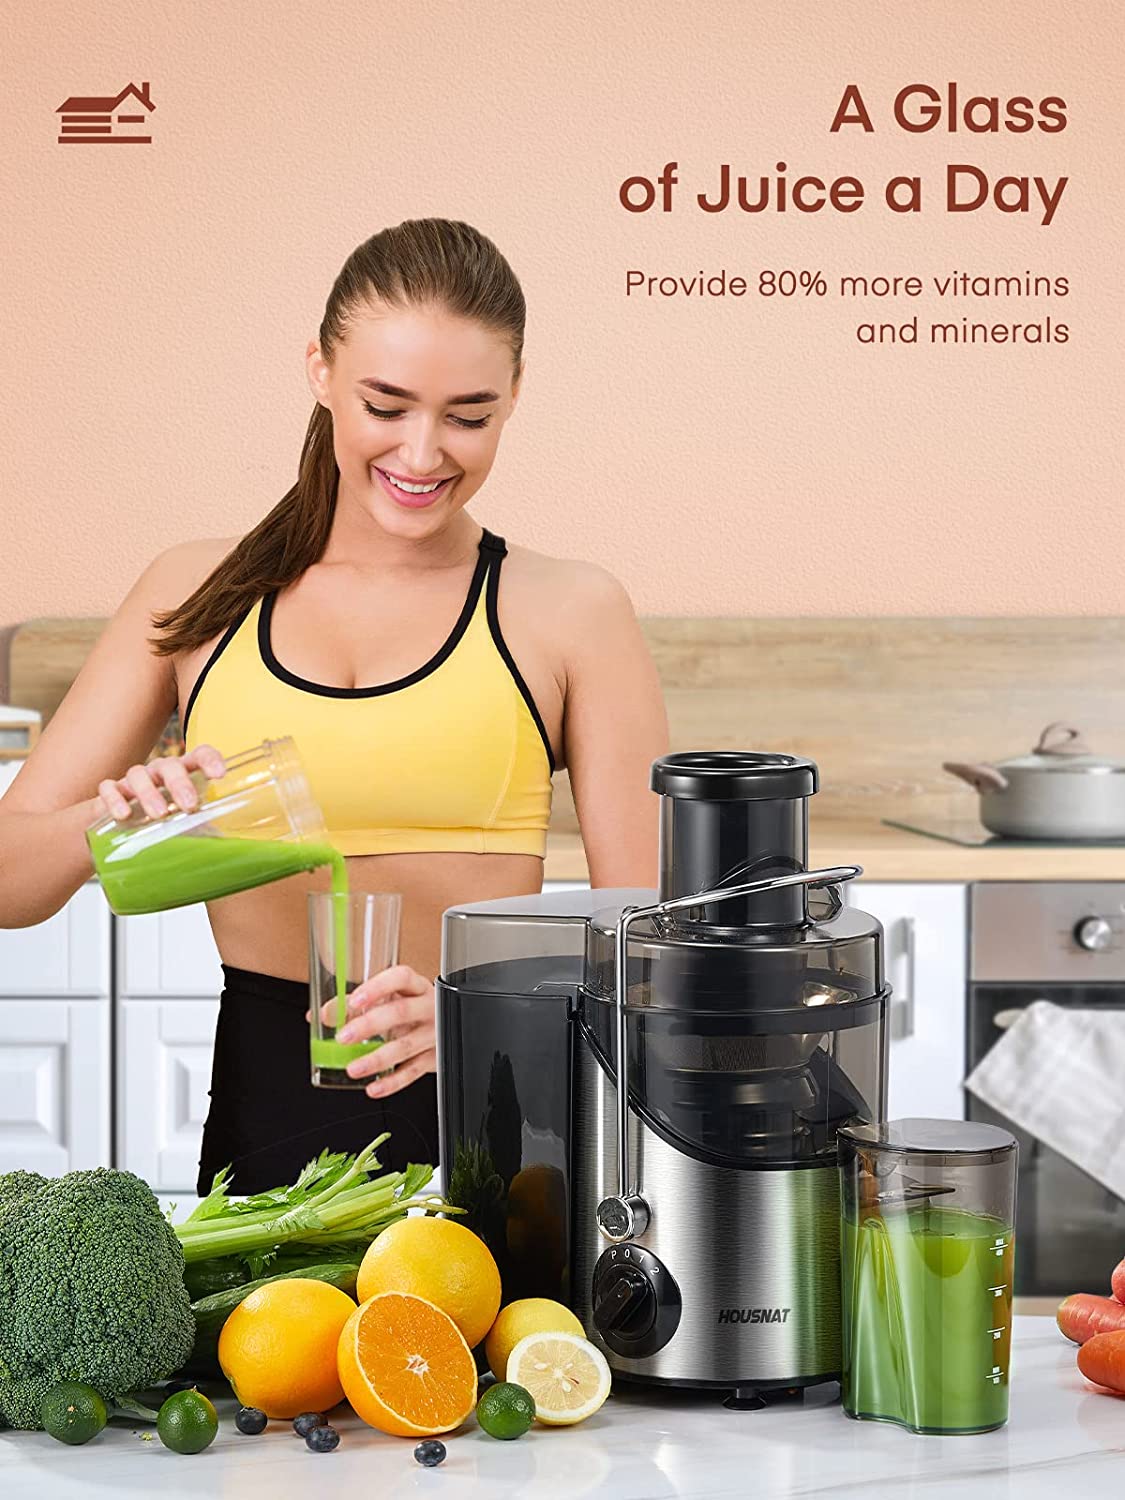 a glass of juice a day, Juicer Machine, Juicers Easy to Clean, HOUSNAT Centrifugal Extractor Juicer 3 Speeds with Big Mouth 3" Feed Chute, Juicer Extractor for Fruits & Vegs, Electric Juicer with Anti-Slip, BPA-Free